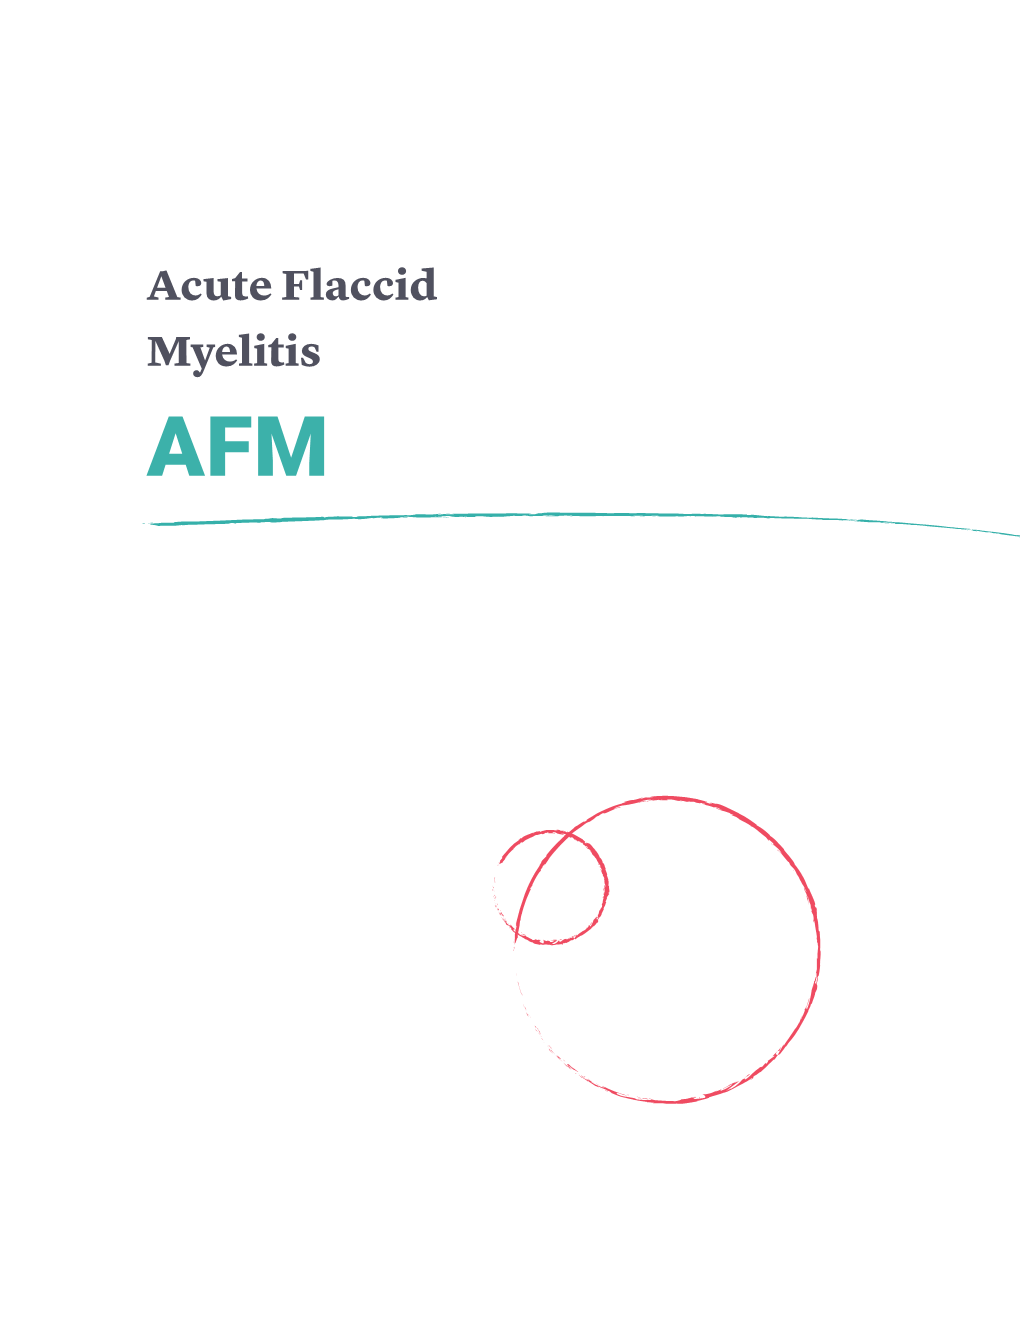 Acute Flaccid Myelitis AFM Acute Flaccid Myelitis (AFM) Is a Type of Inflammation in the Spinal Cord That Has Specific Clinical and MRI Features